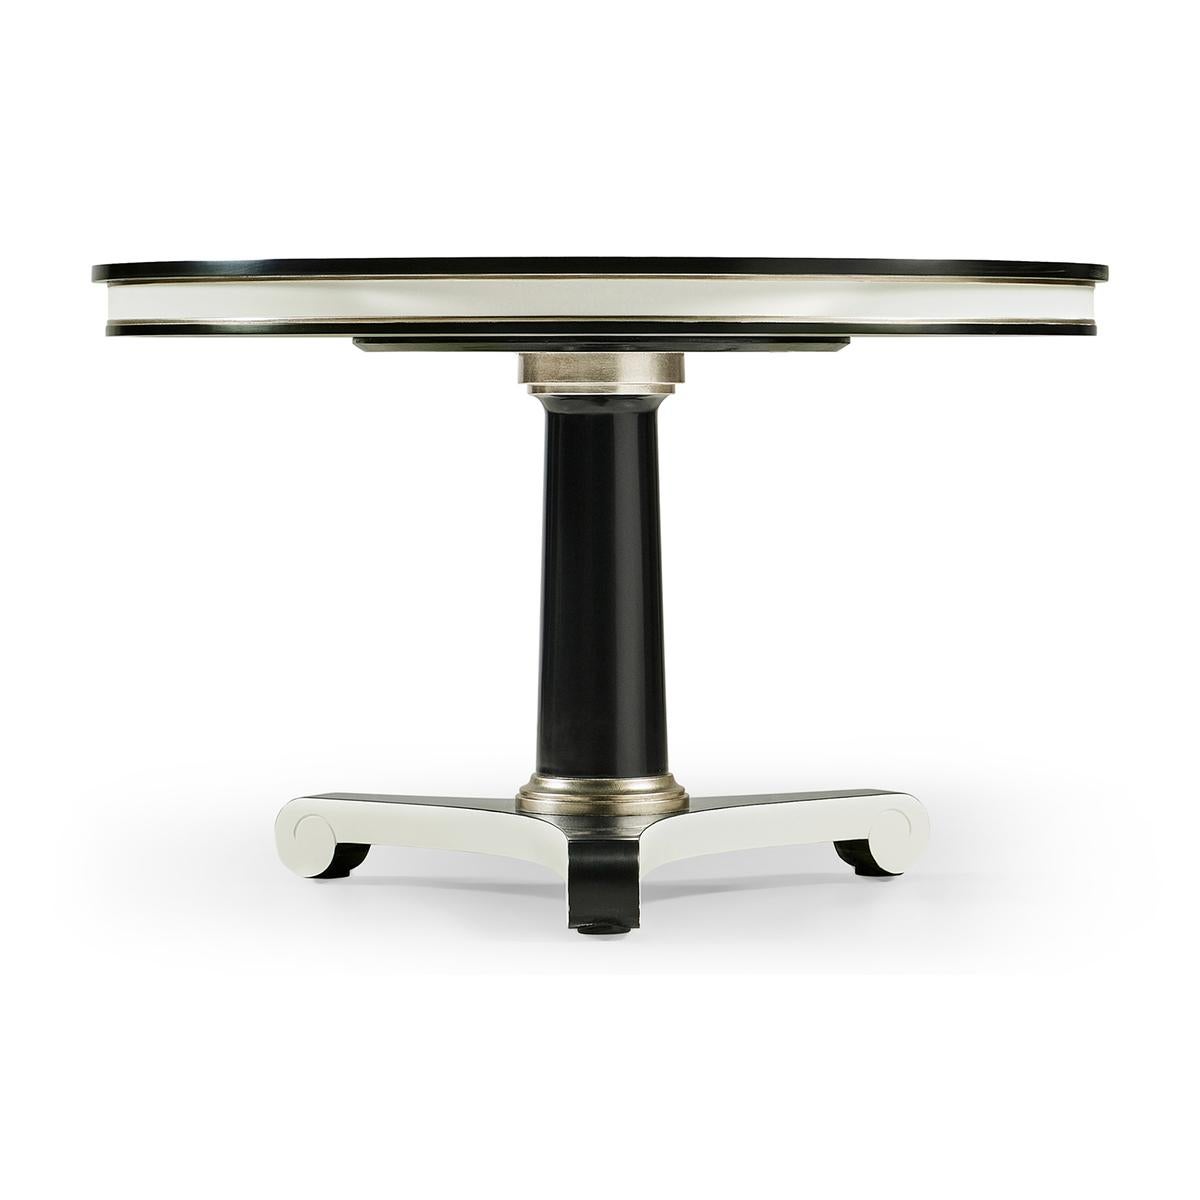 Classic black and white dining table inspired by the Biedermeier era, with clean lines, classic vibes and versatility which make it suitable for a variety of settings - dining, foyer, office or living. The bold black and white lines are accented